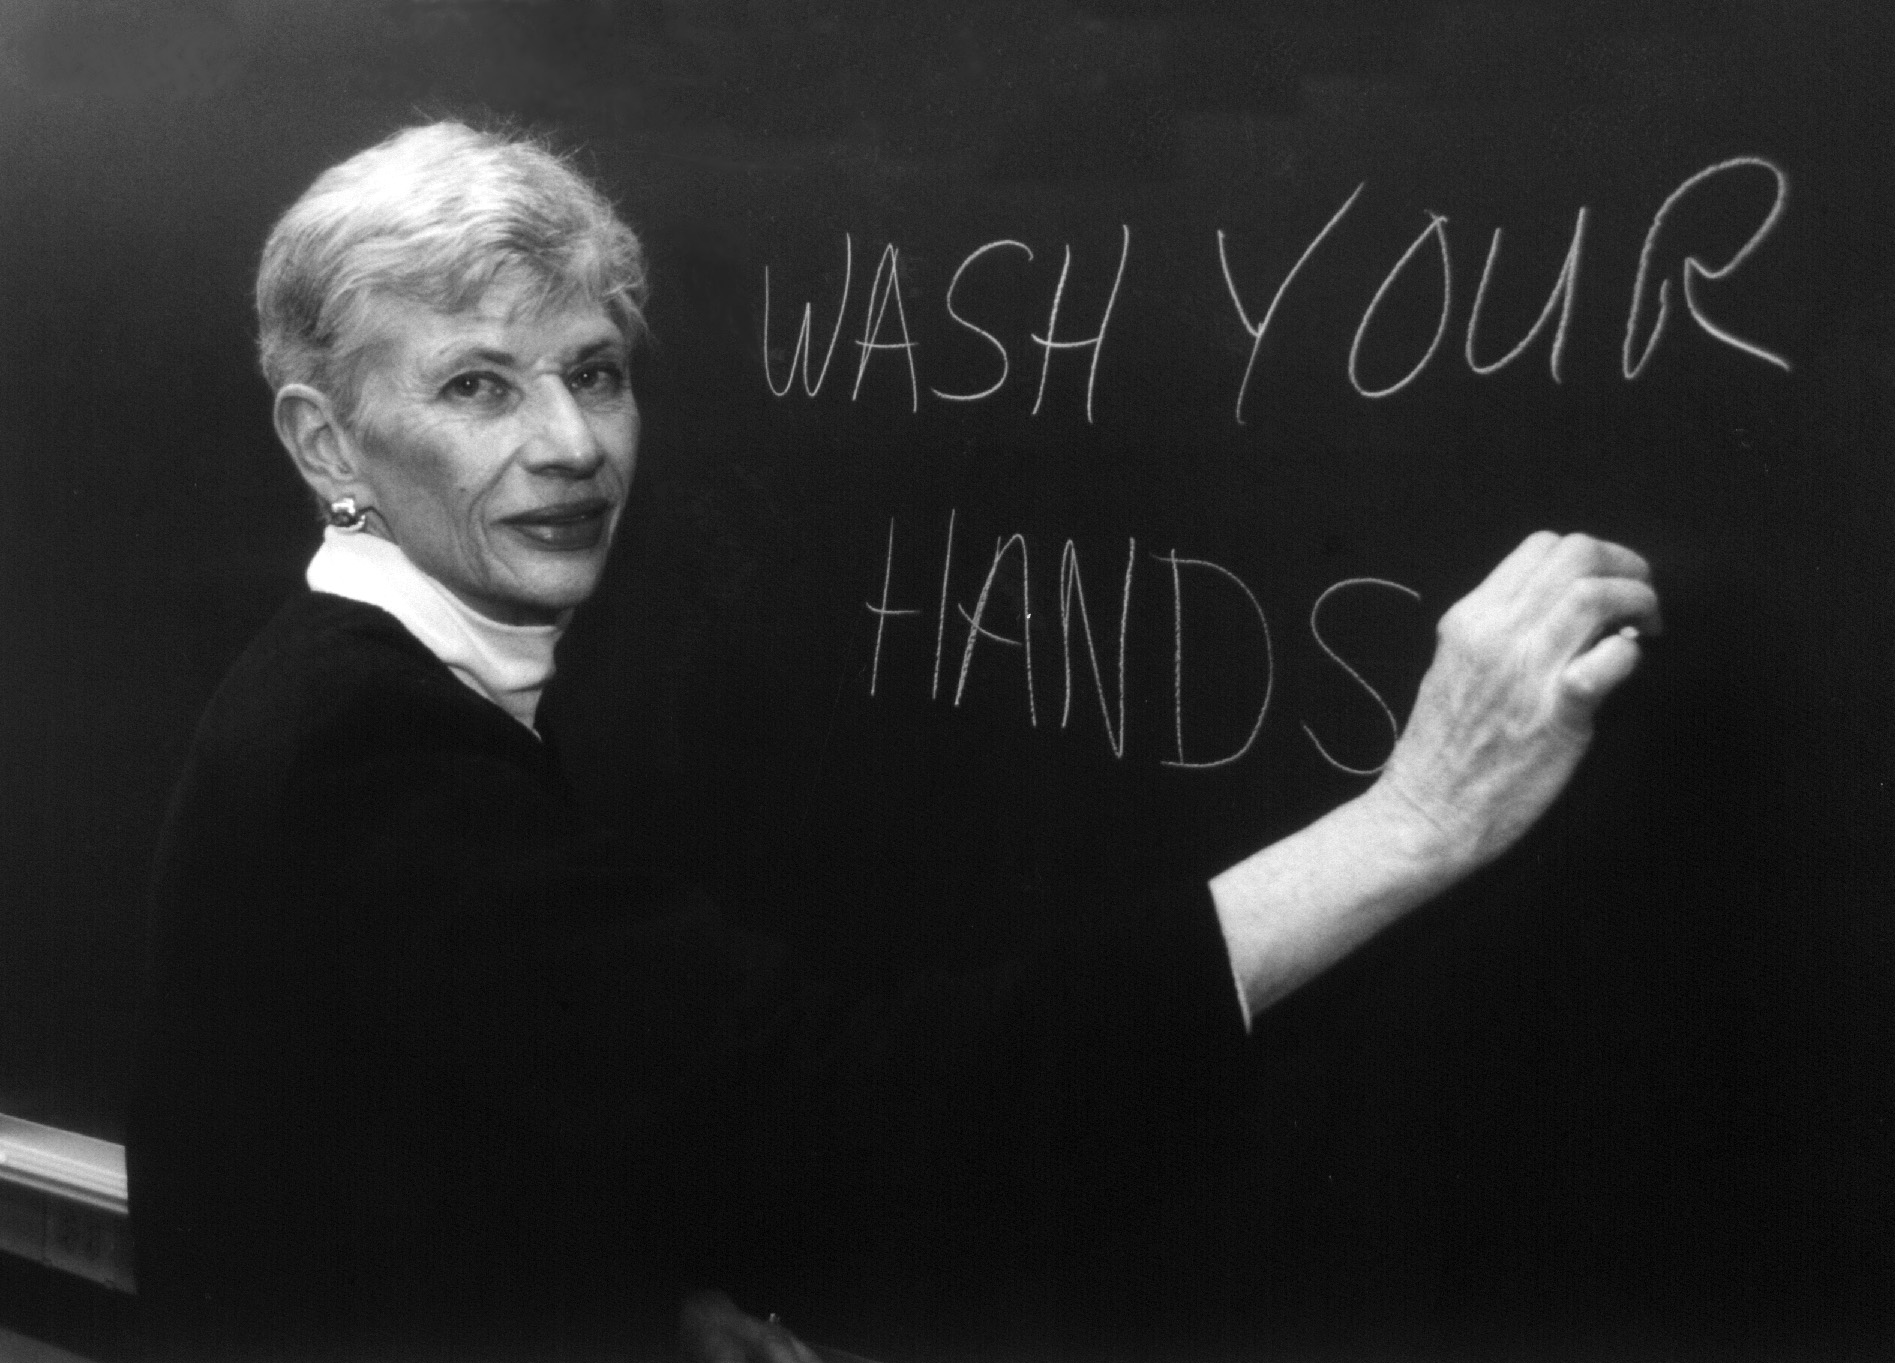 Microbiologist Dixie Whitt writes on a chalkboard, "Wash your hands."